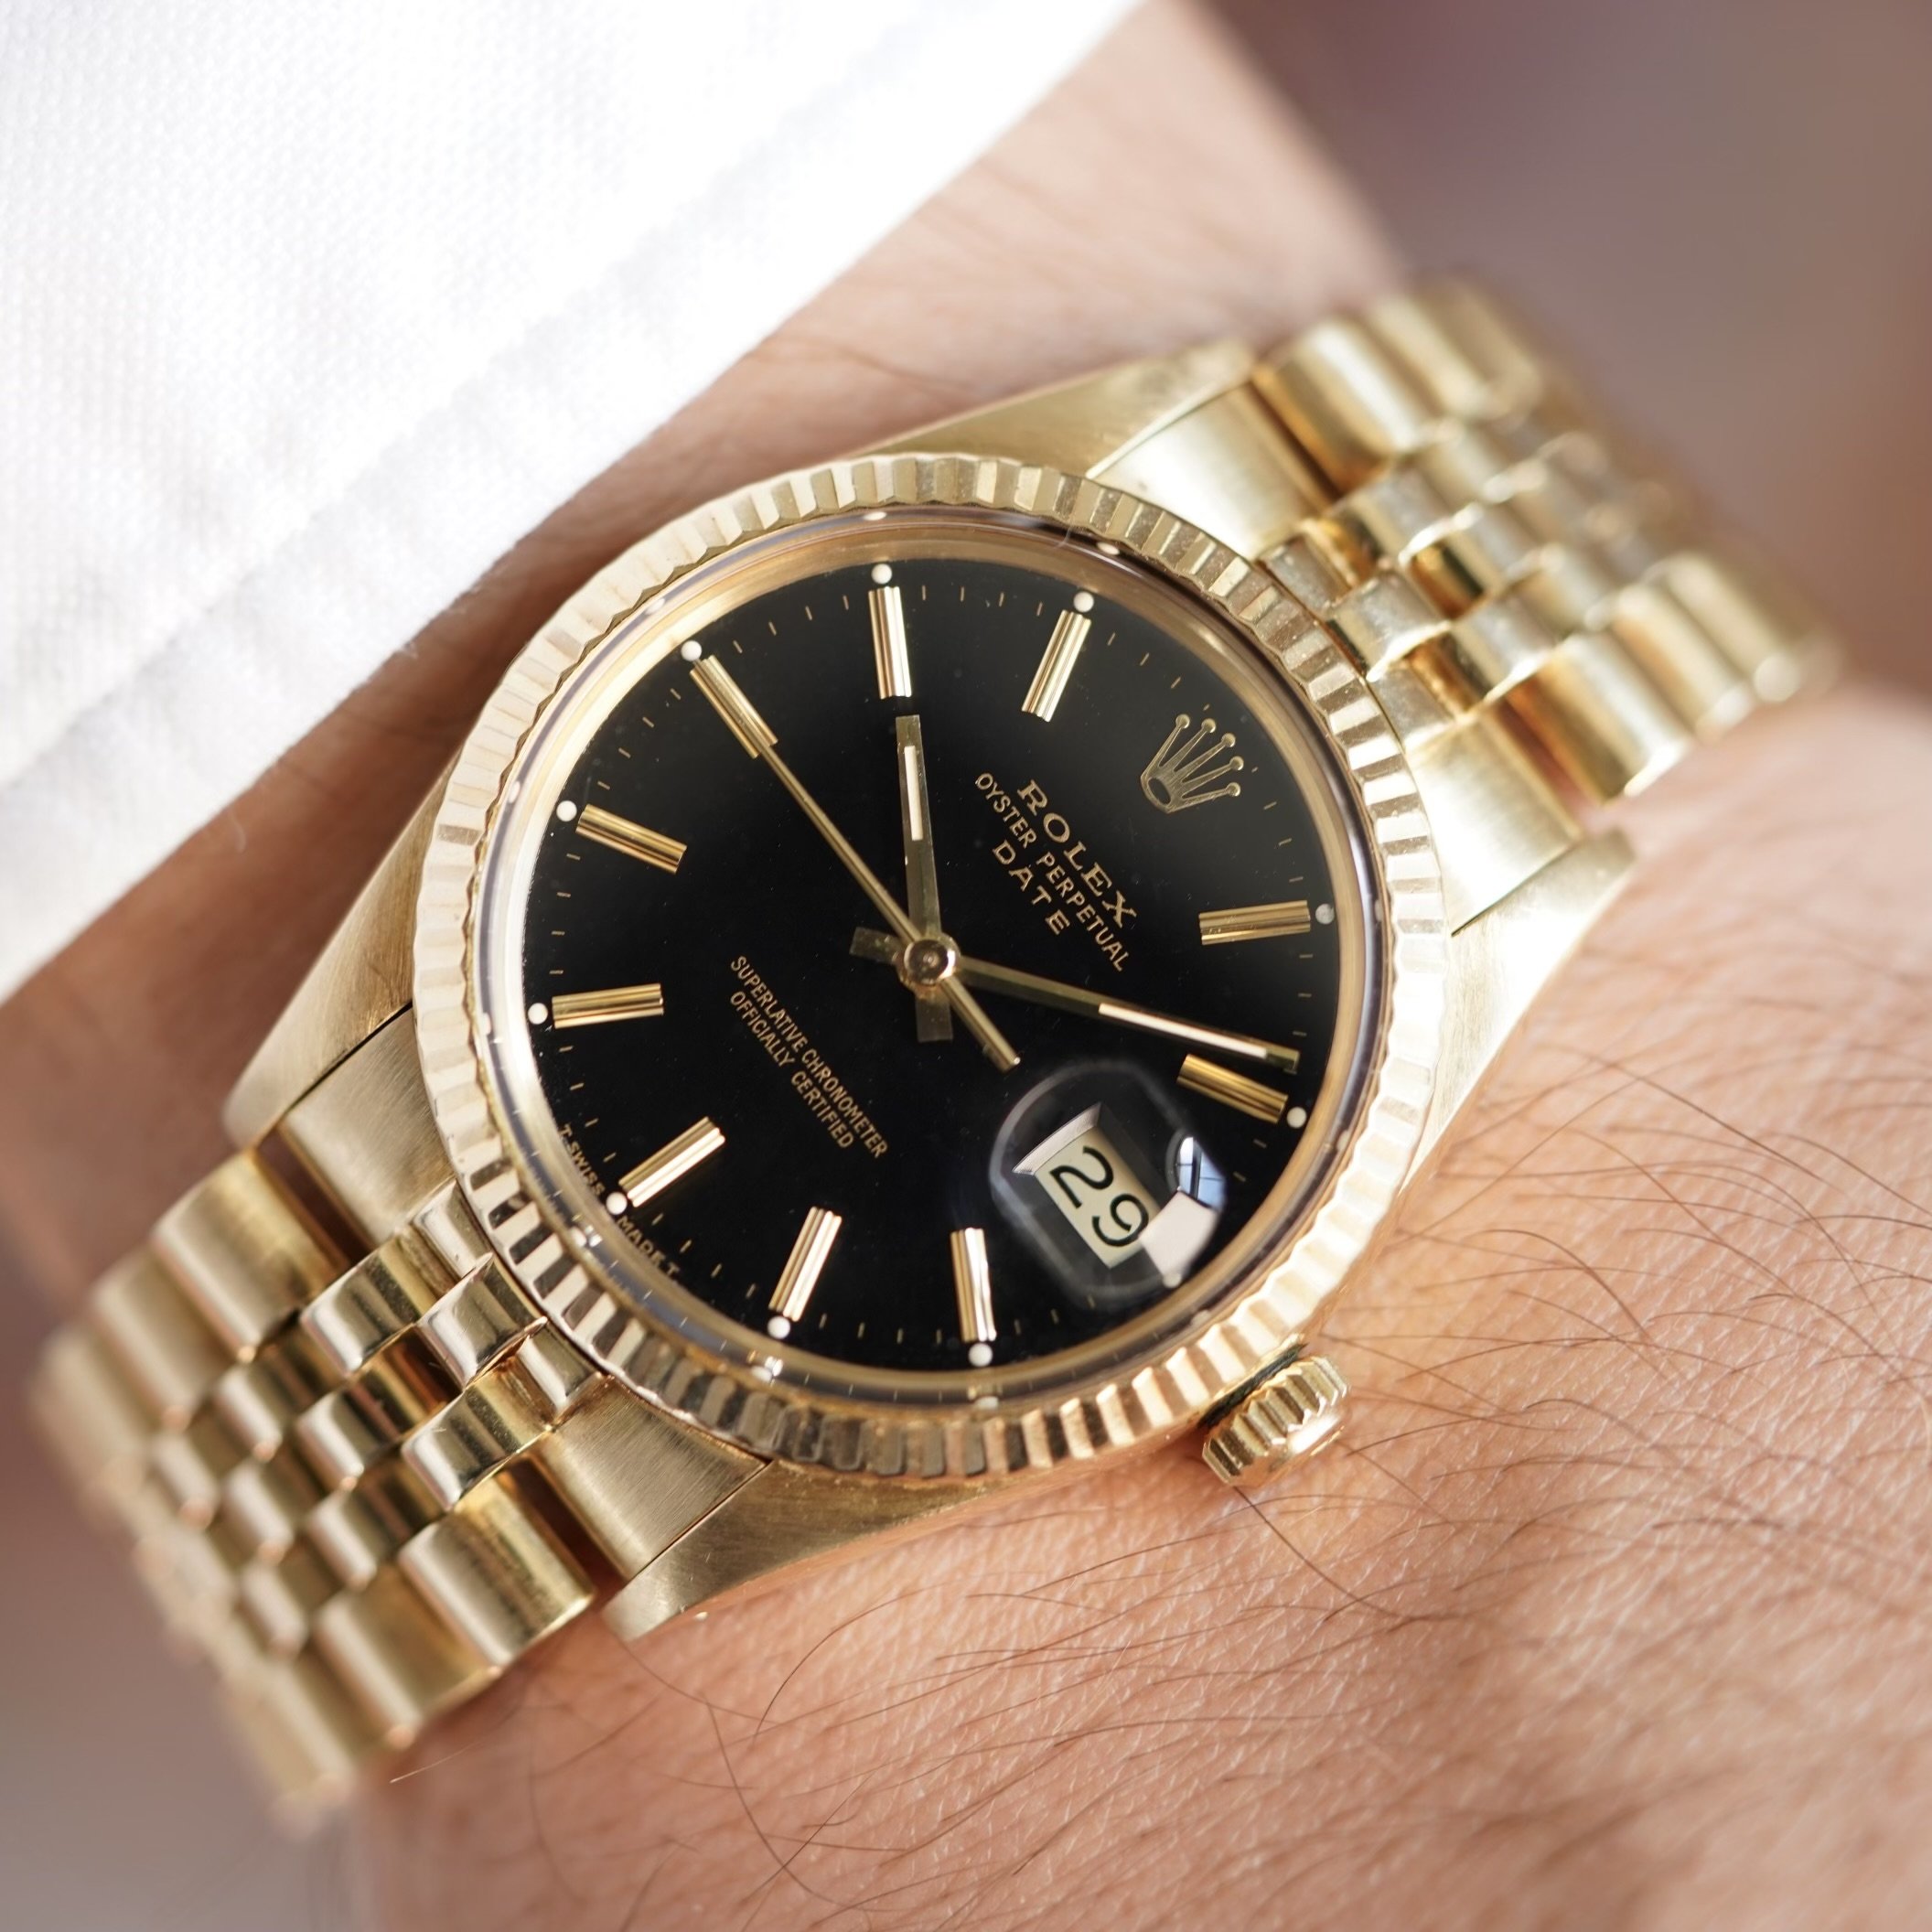 Rolex Date Reference 15037 